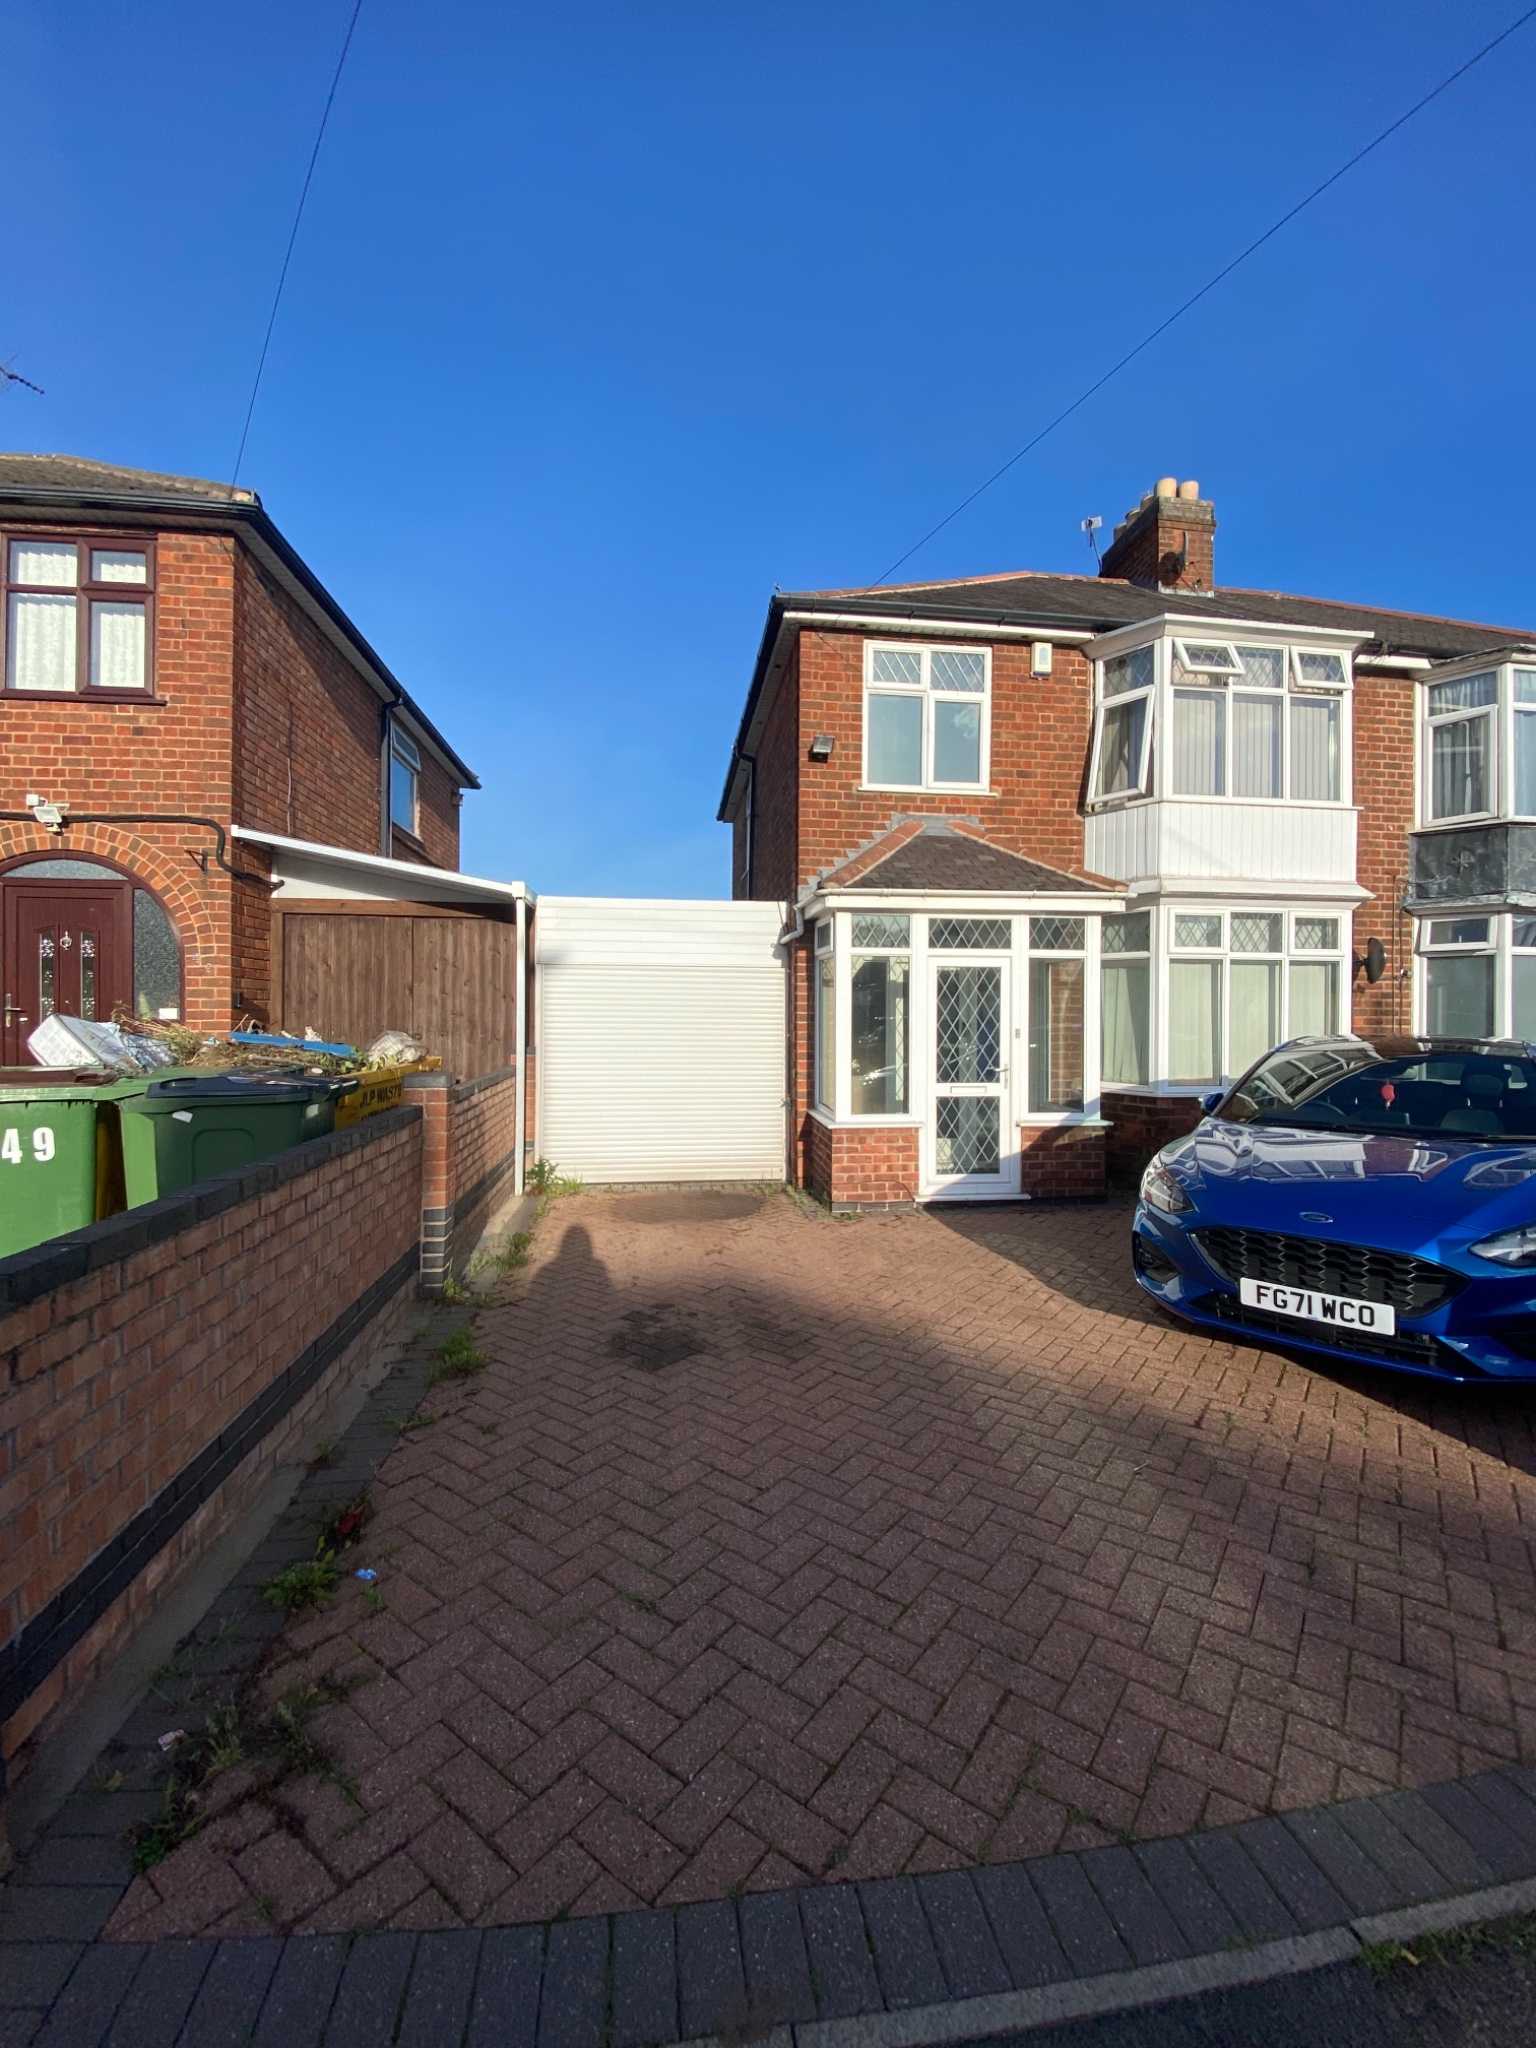 House in Braunstone, Leicestershire 10157551